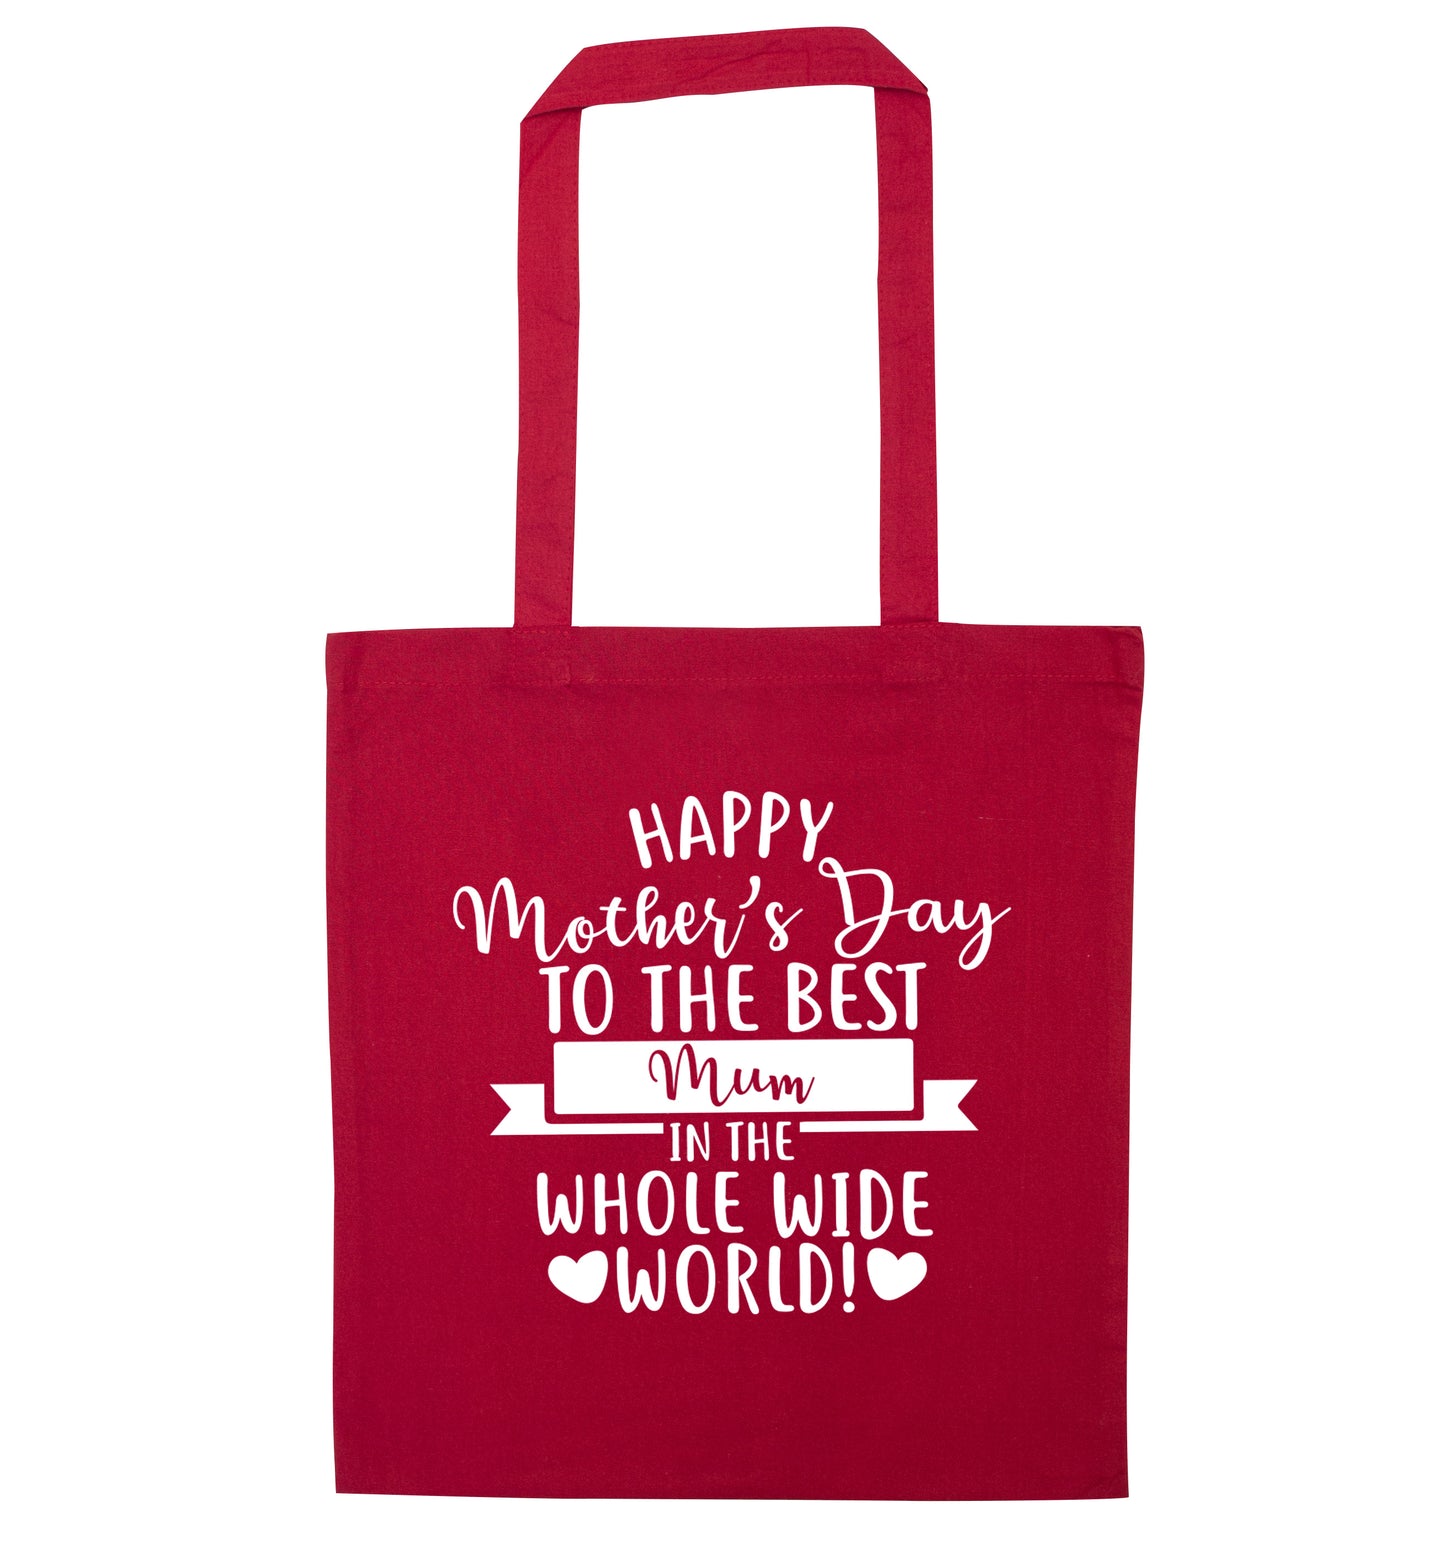 Happy Mother's Day to the best mum in the whole wide world! red tote bag